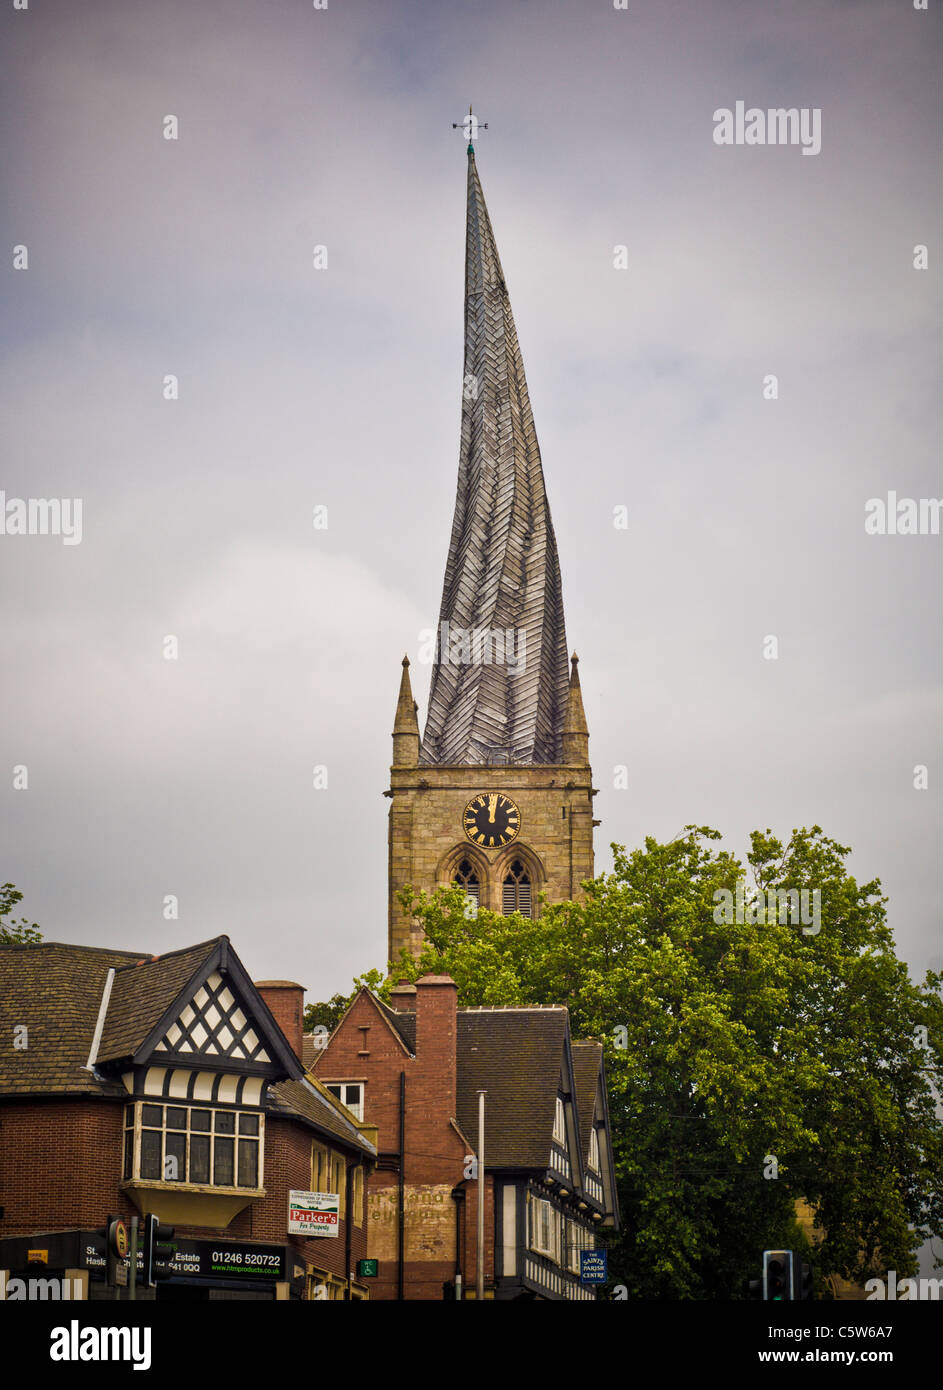 Chesterfield Parish Church with its famous crooked spire. UK. Stock Photo